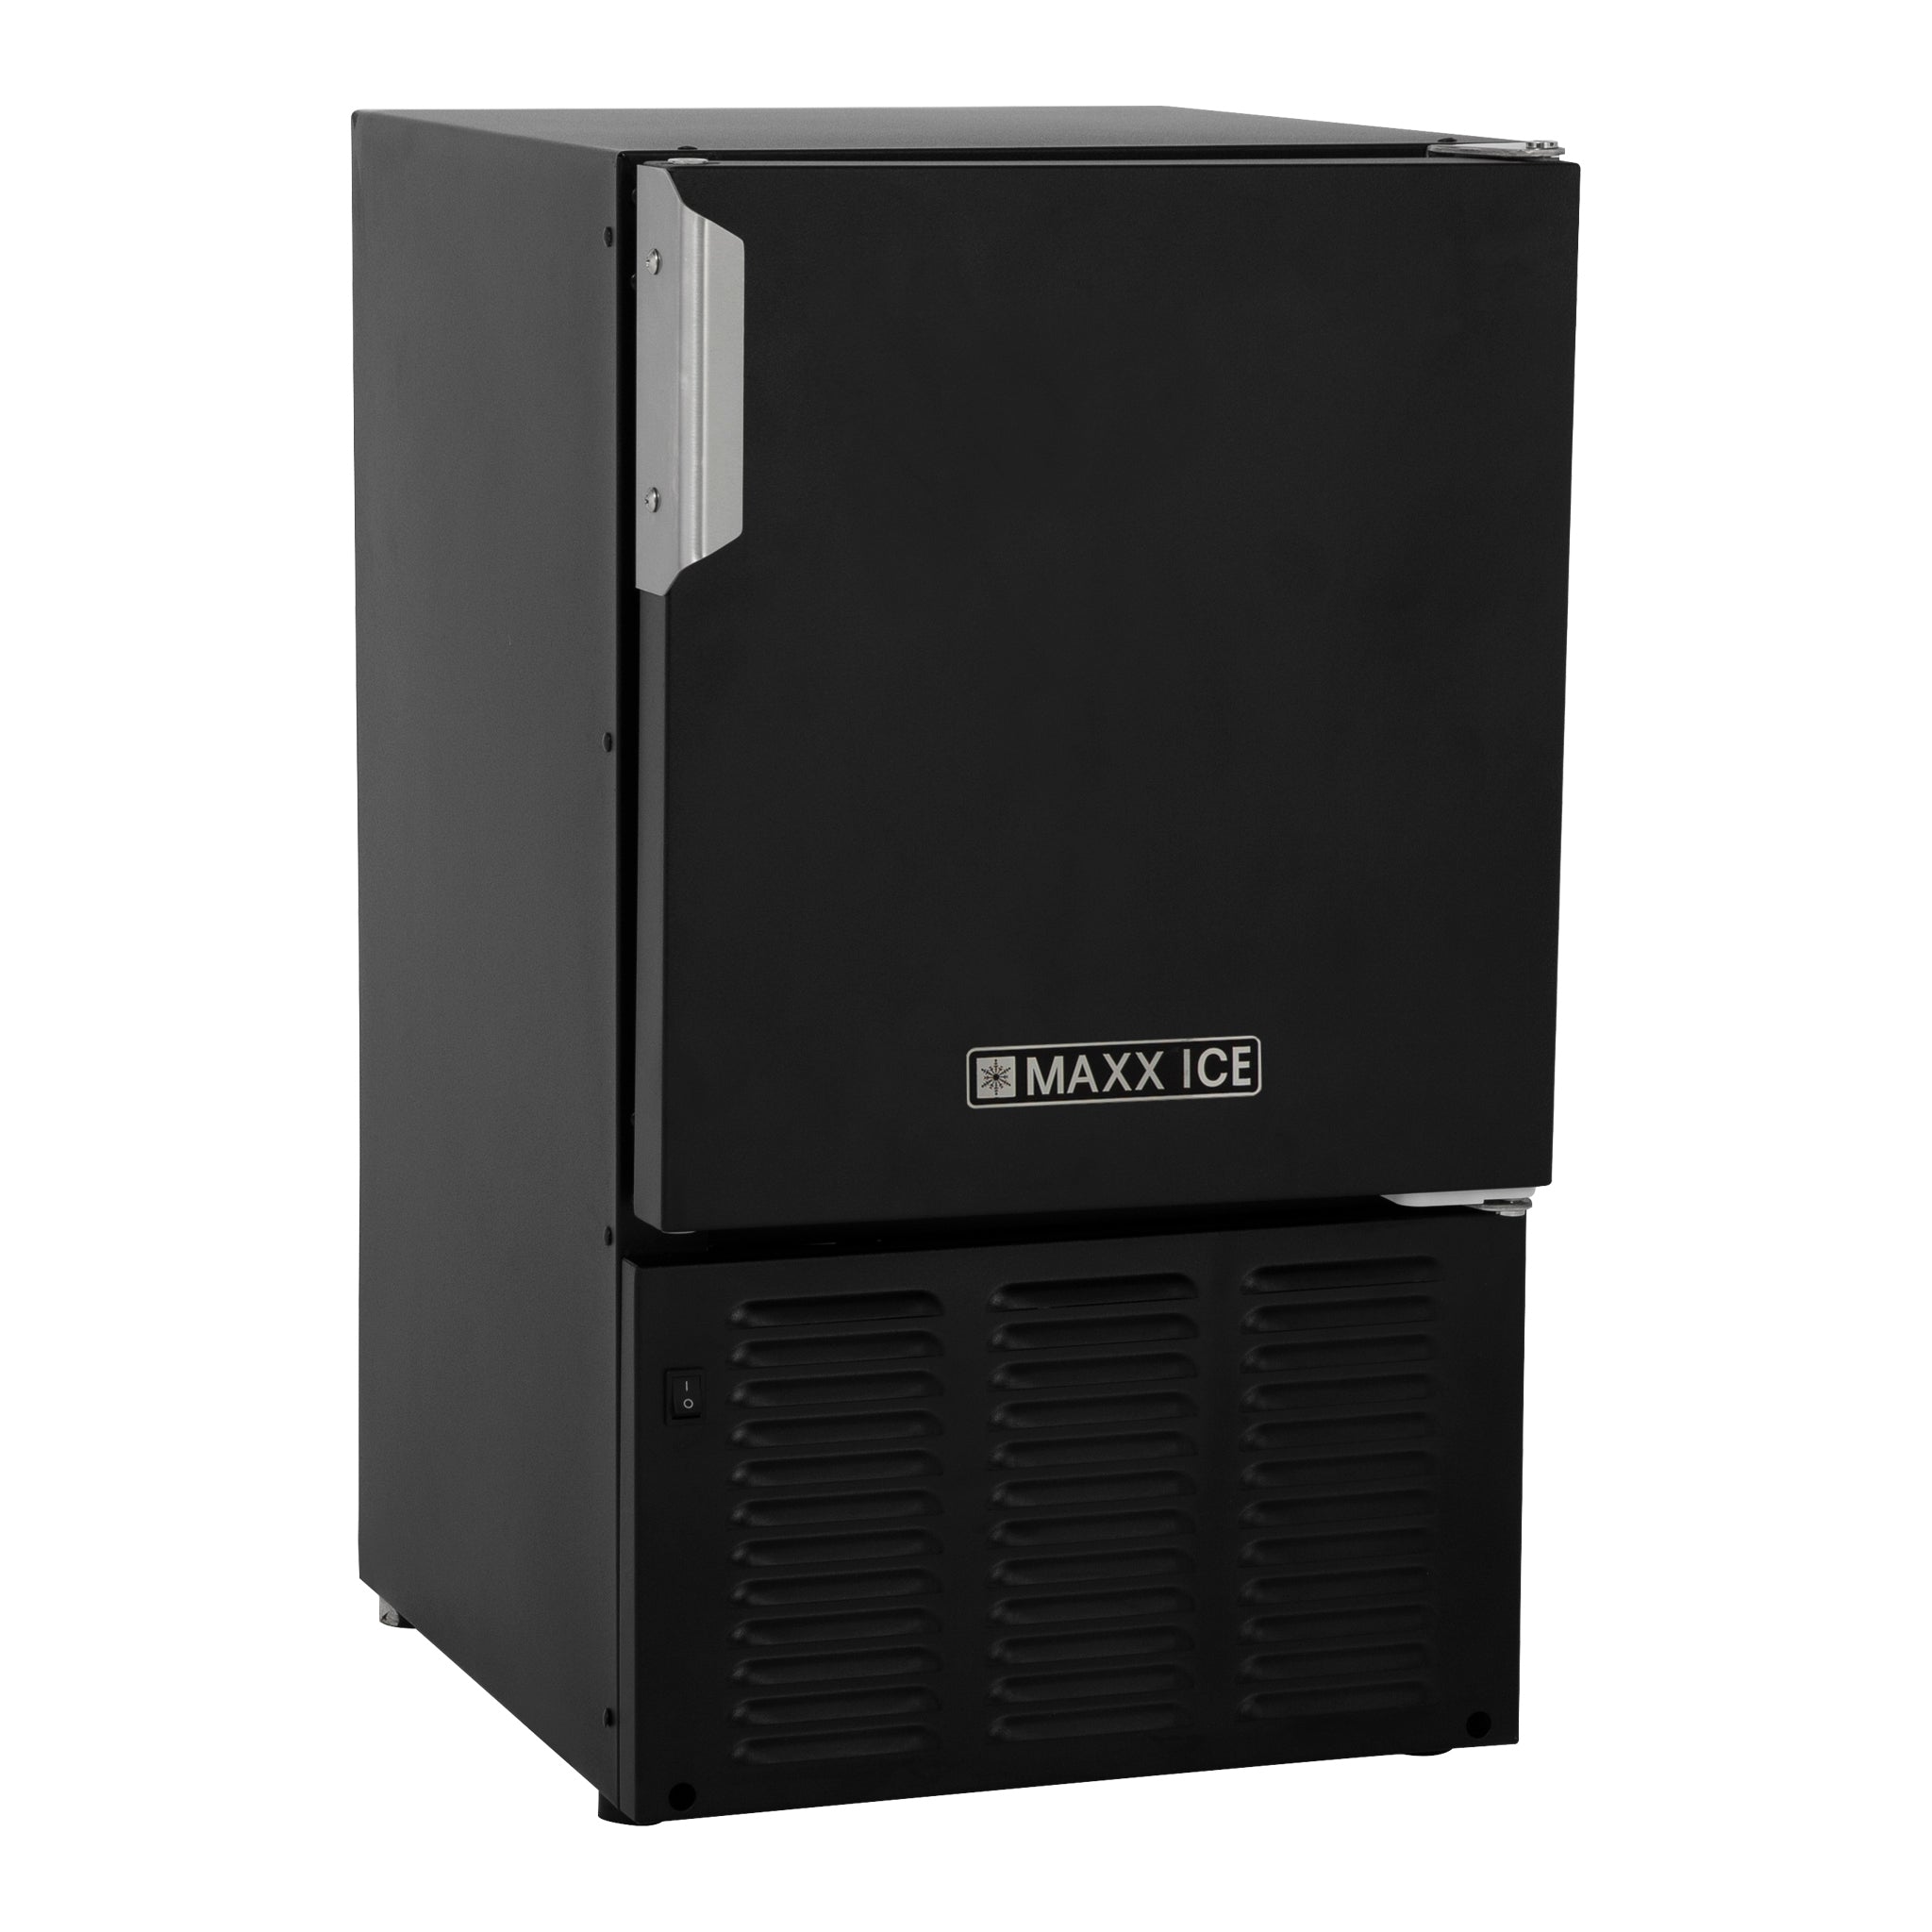 Maxx Ice Self-Contained Ice Machine, 75 lbs, Bullet Ice Cubes